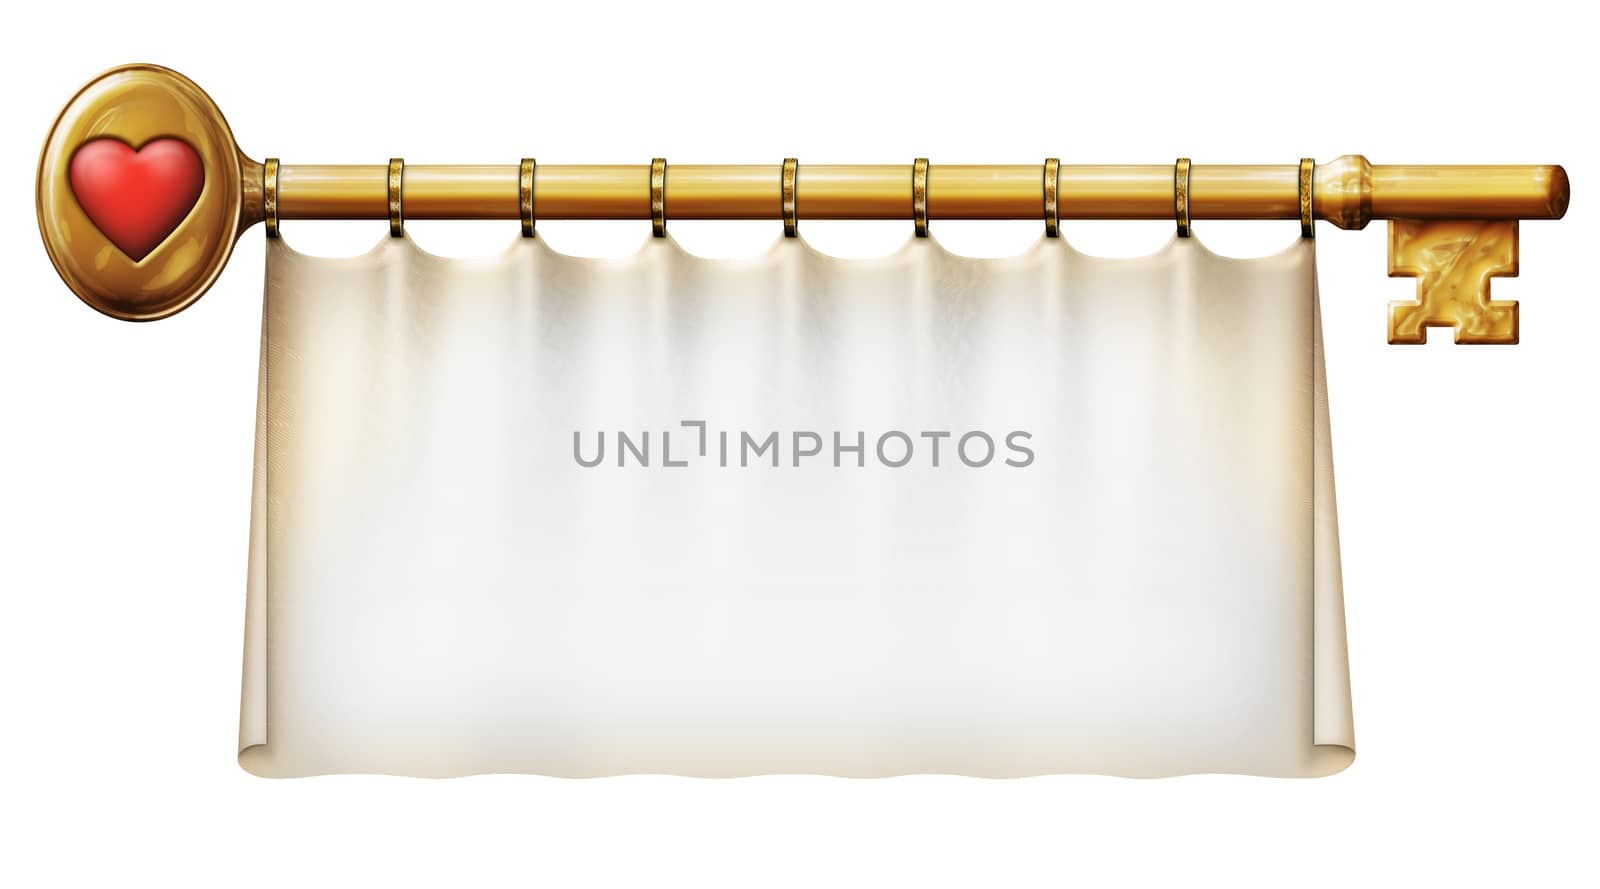 Photo Illustration of a banner hanging on a gold key with a dollar symbol.